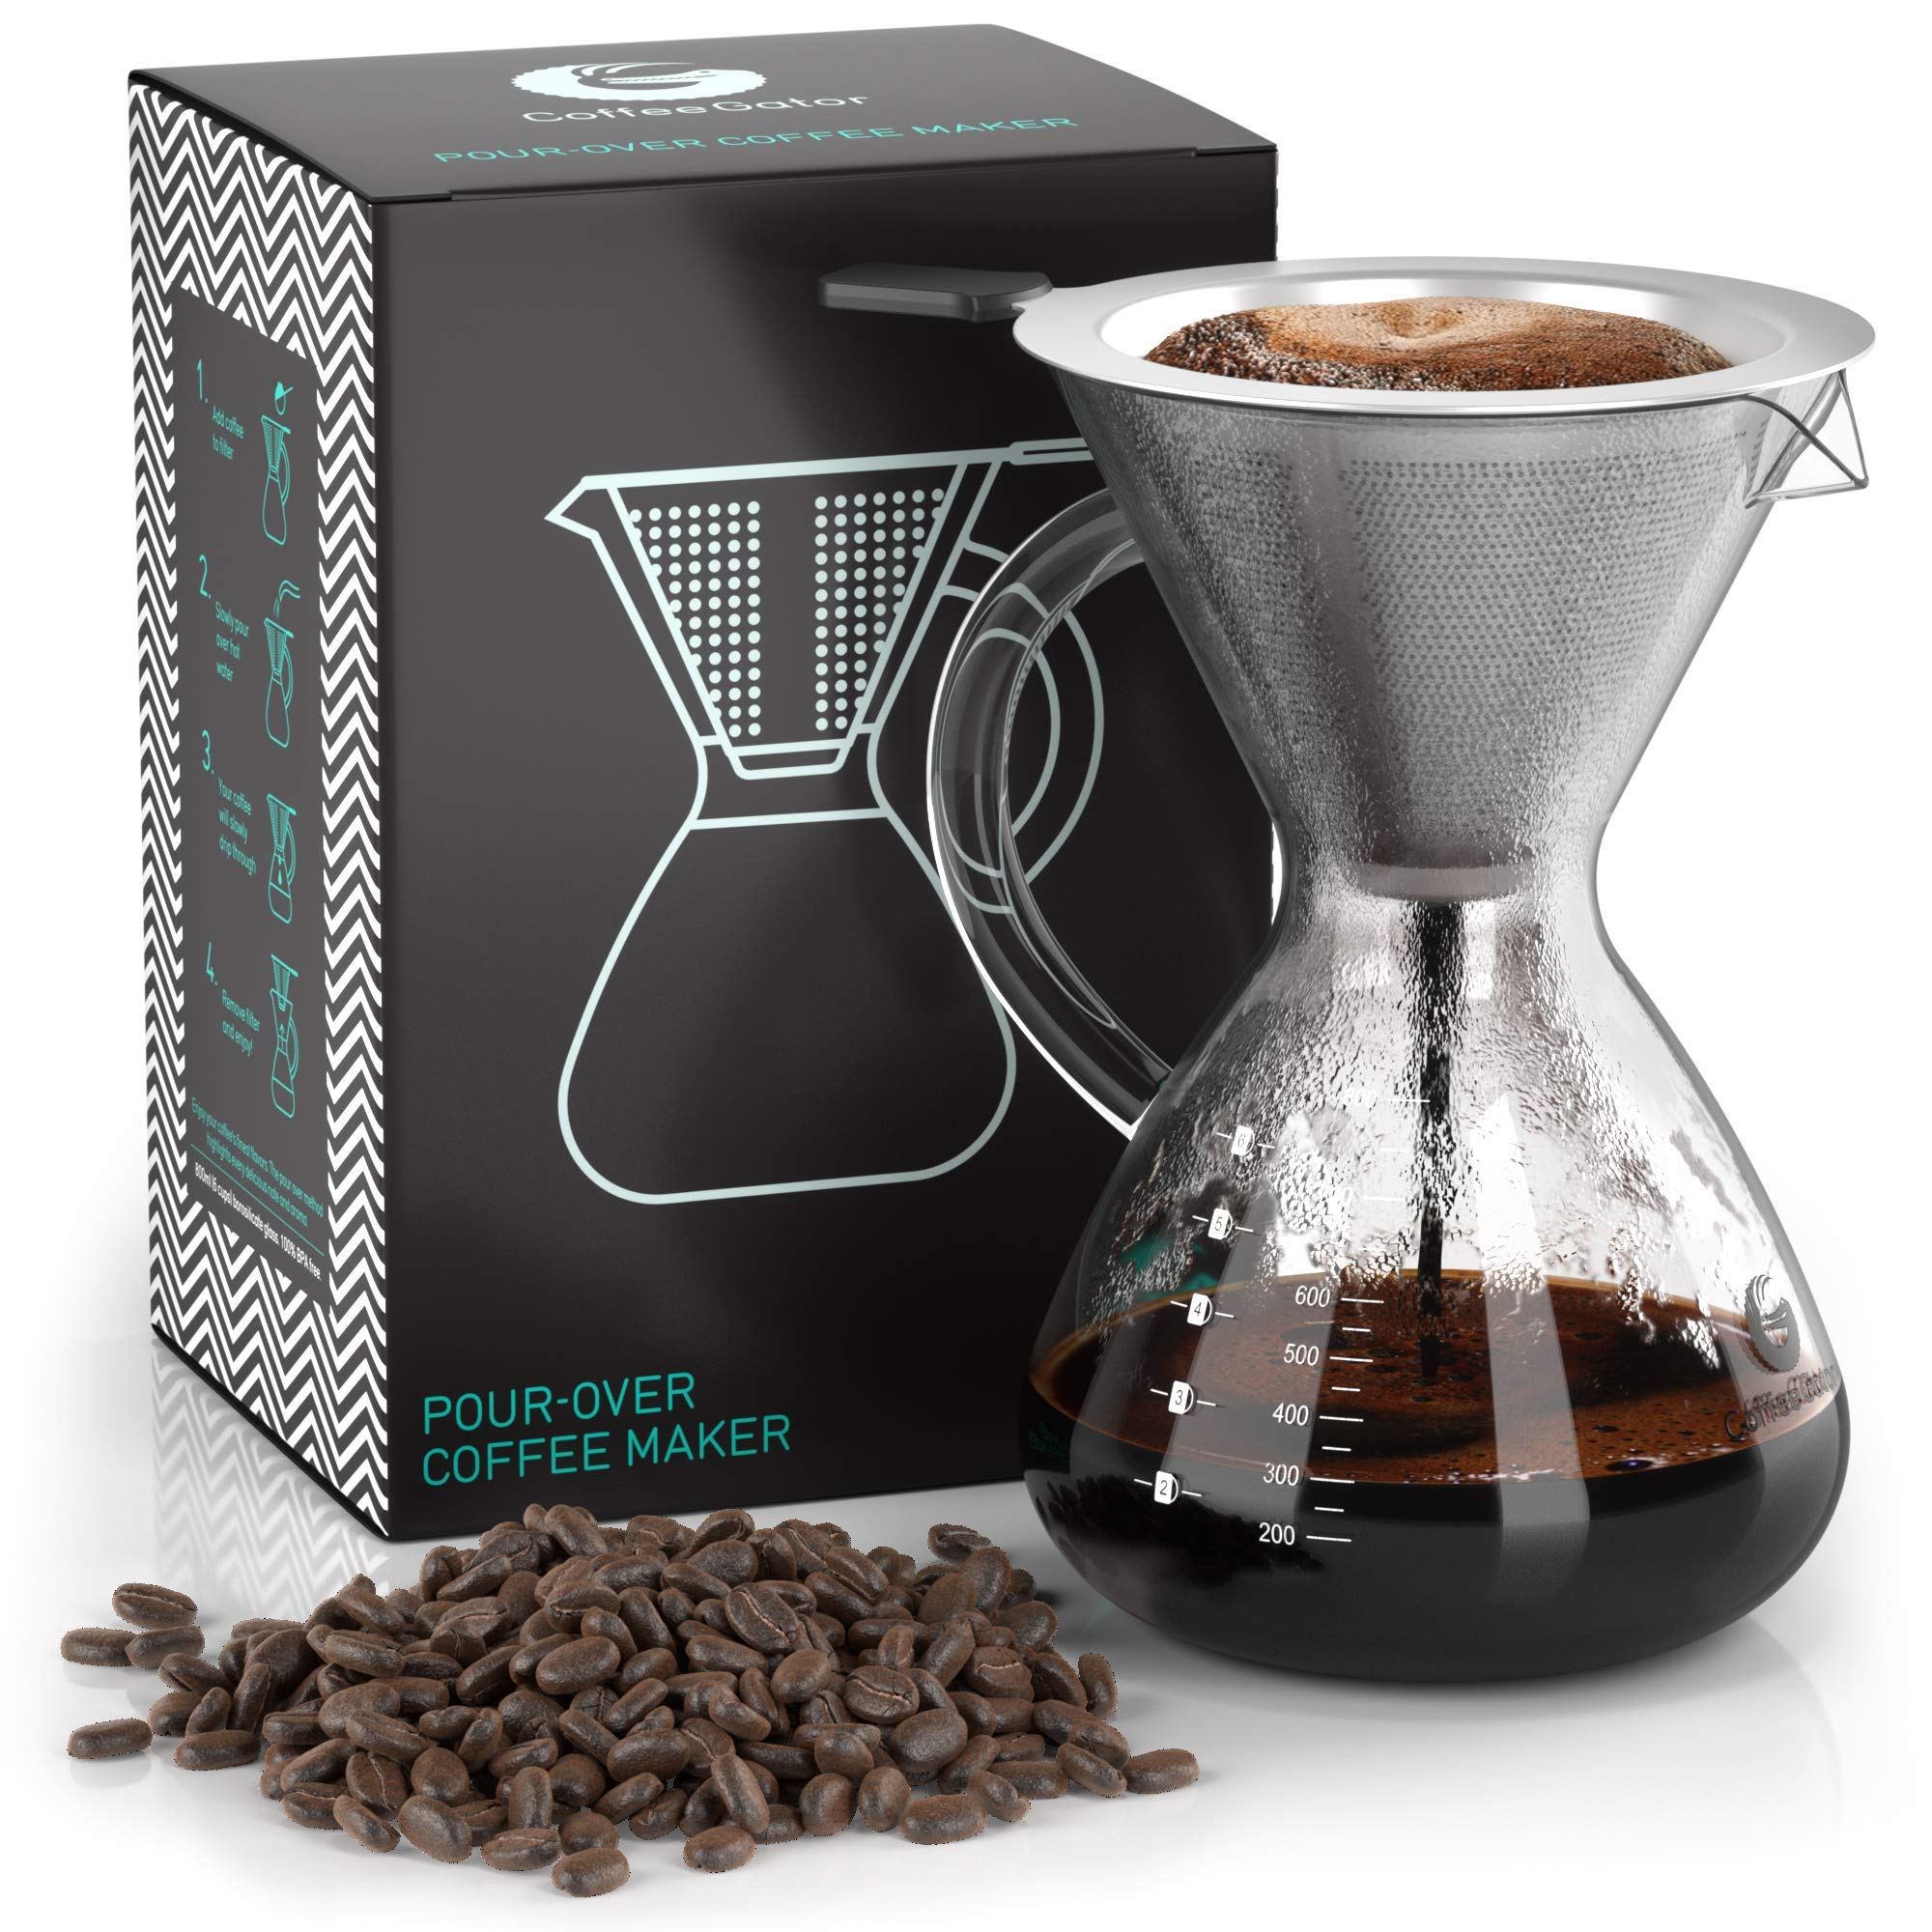 Pour Over Coffee Maker For Perfect Hand Drip Coffee